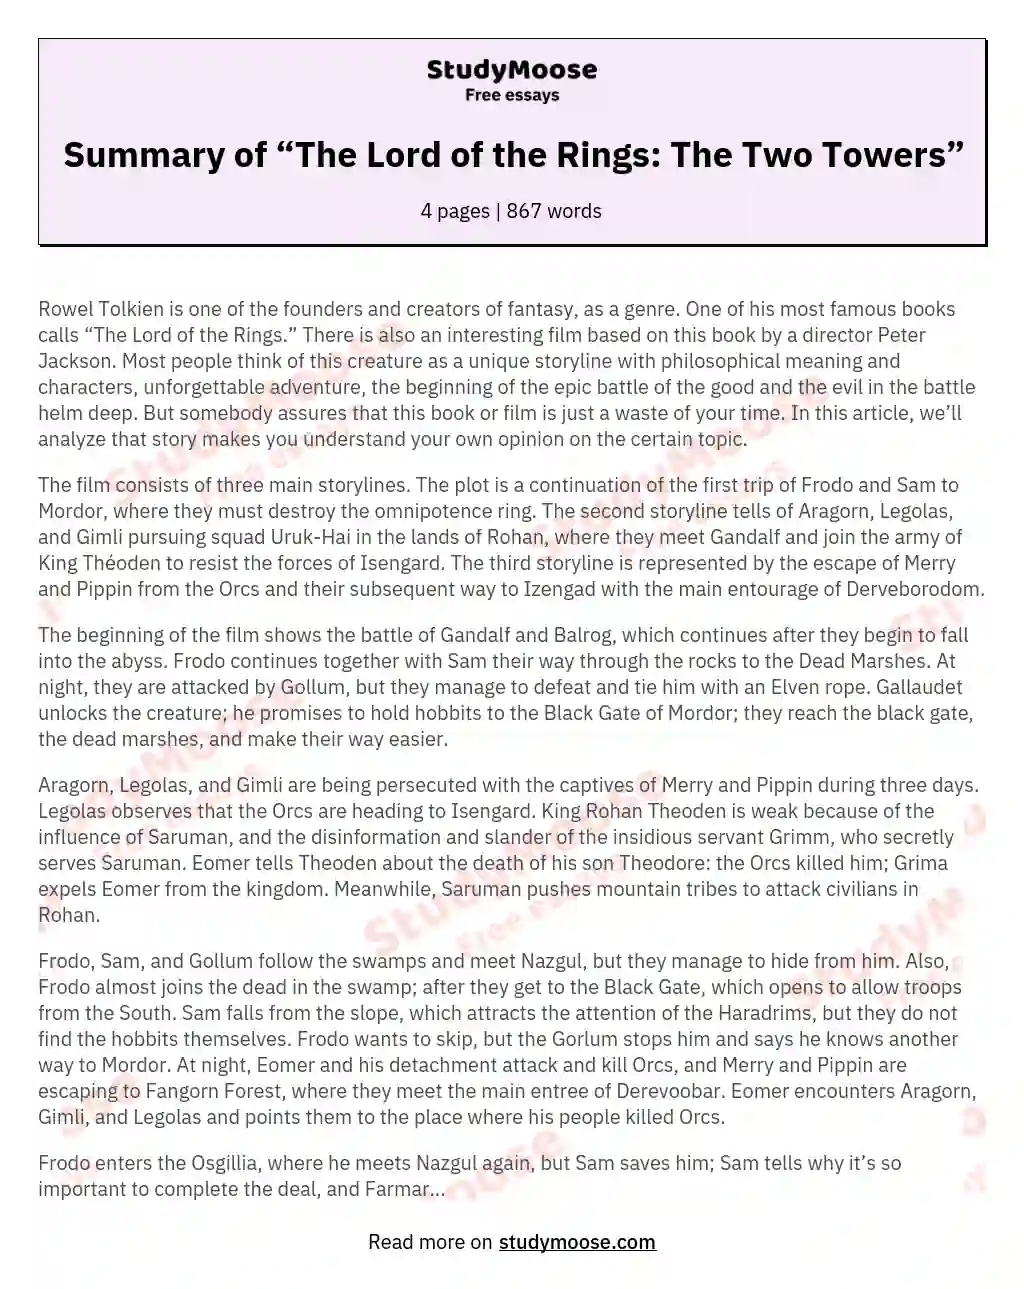 Summary of “The Lord of the Rings: The Two Towers” essay